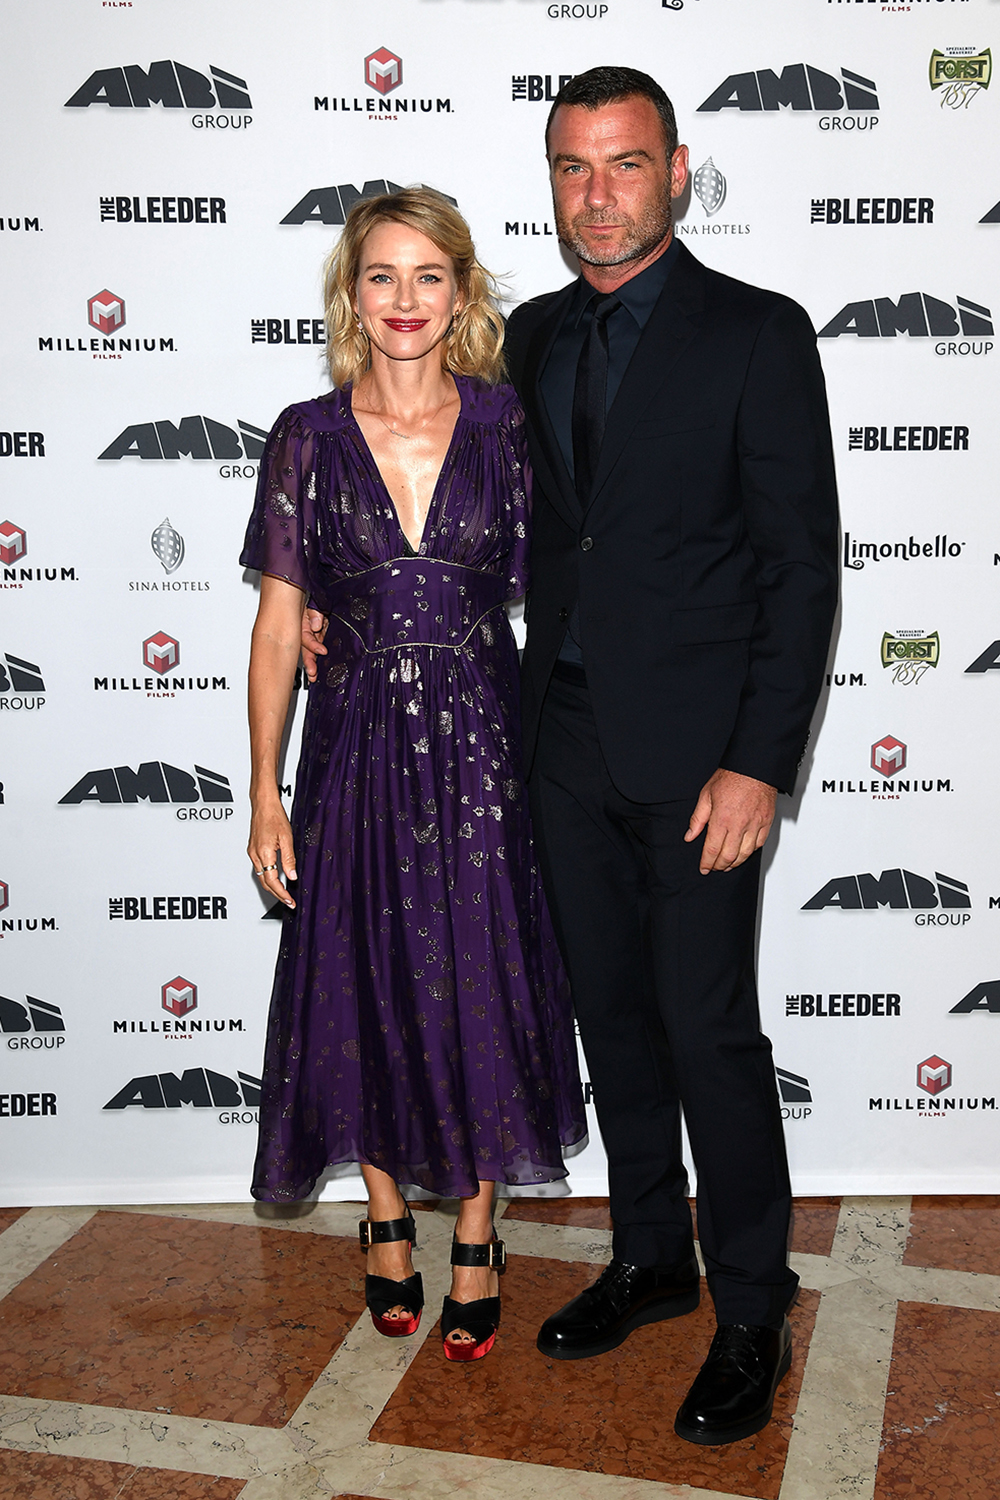 Naomi Watts and Liev Schreiber at the AMBI Exclusive Dinner in honor of their new film The Bleeder.